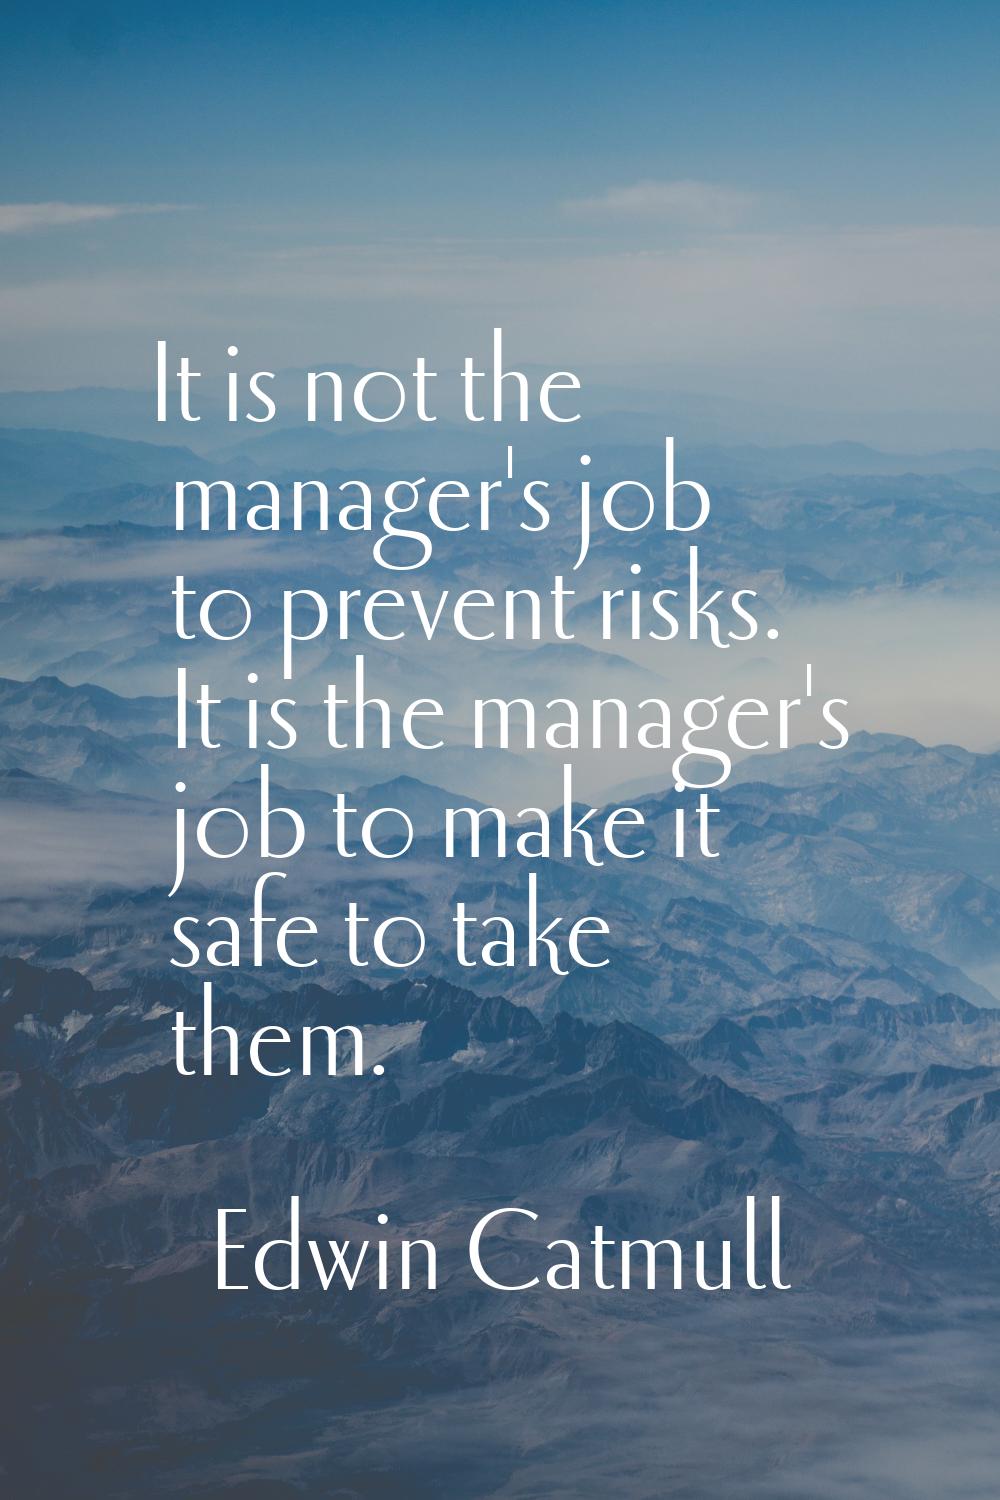 It is not the manager's job to prevent risks. It is the manager's job to make it safe to take them.